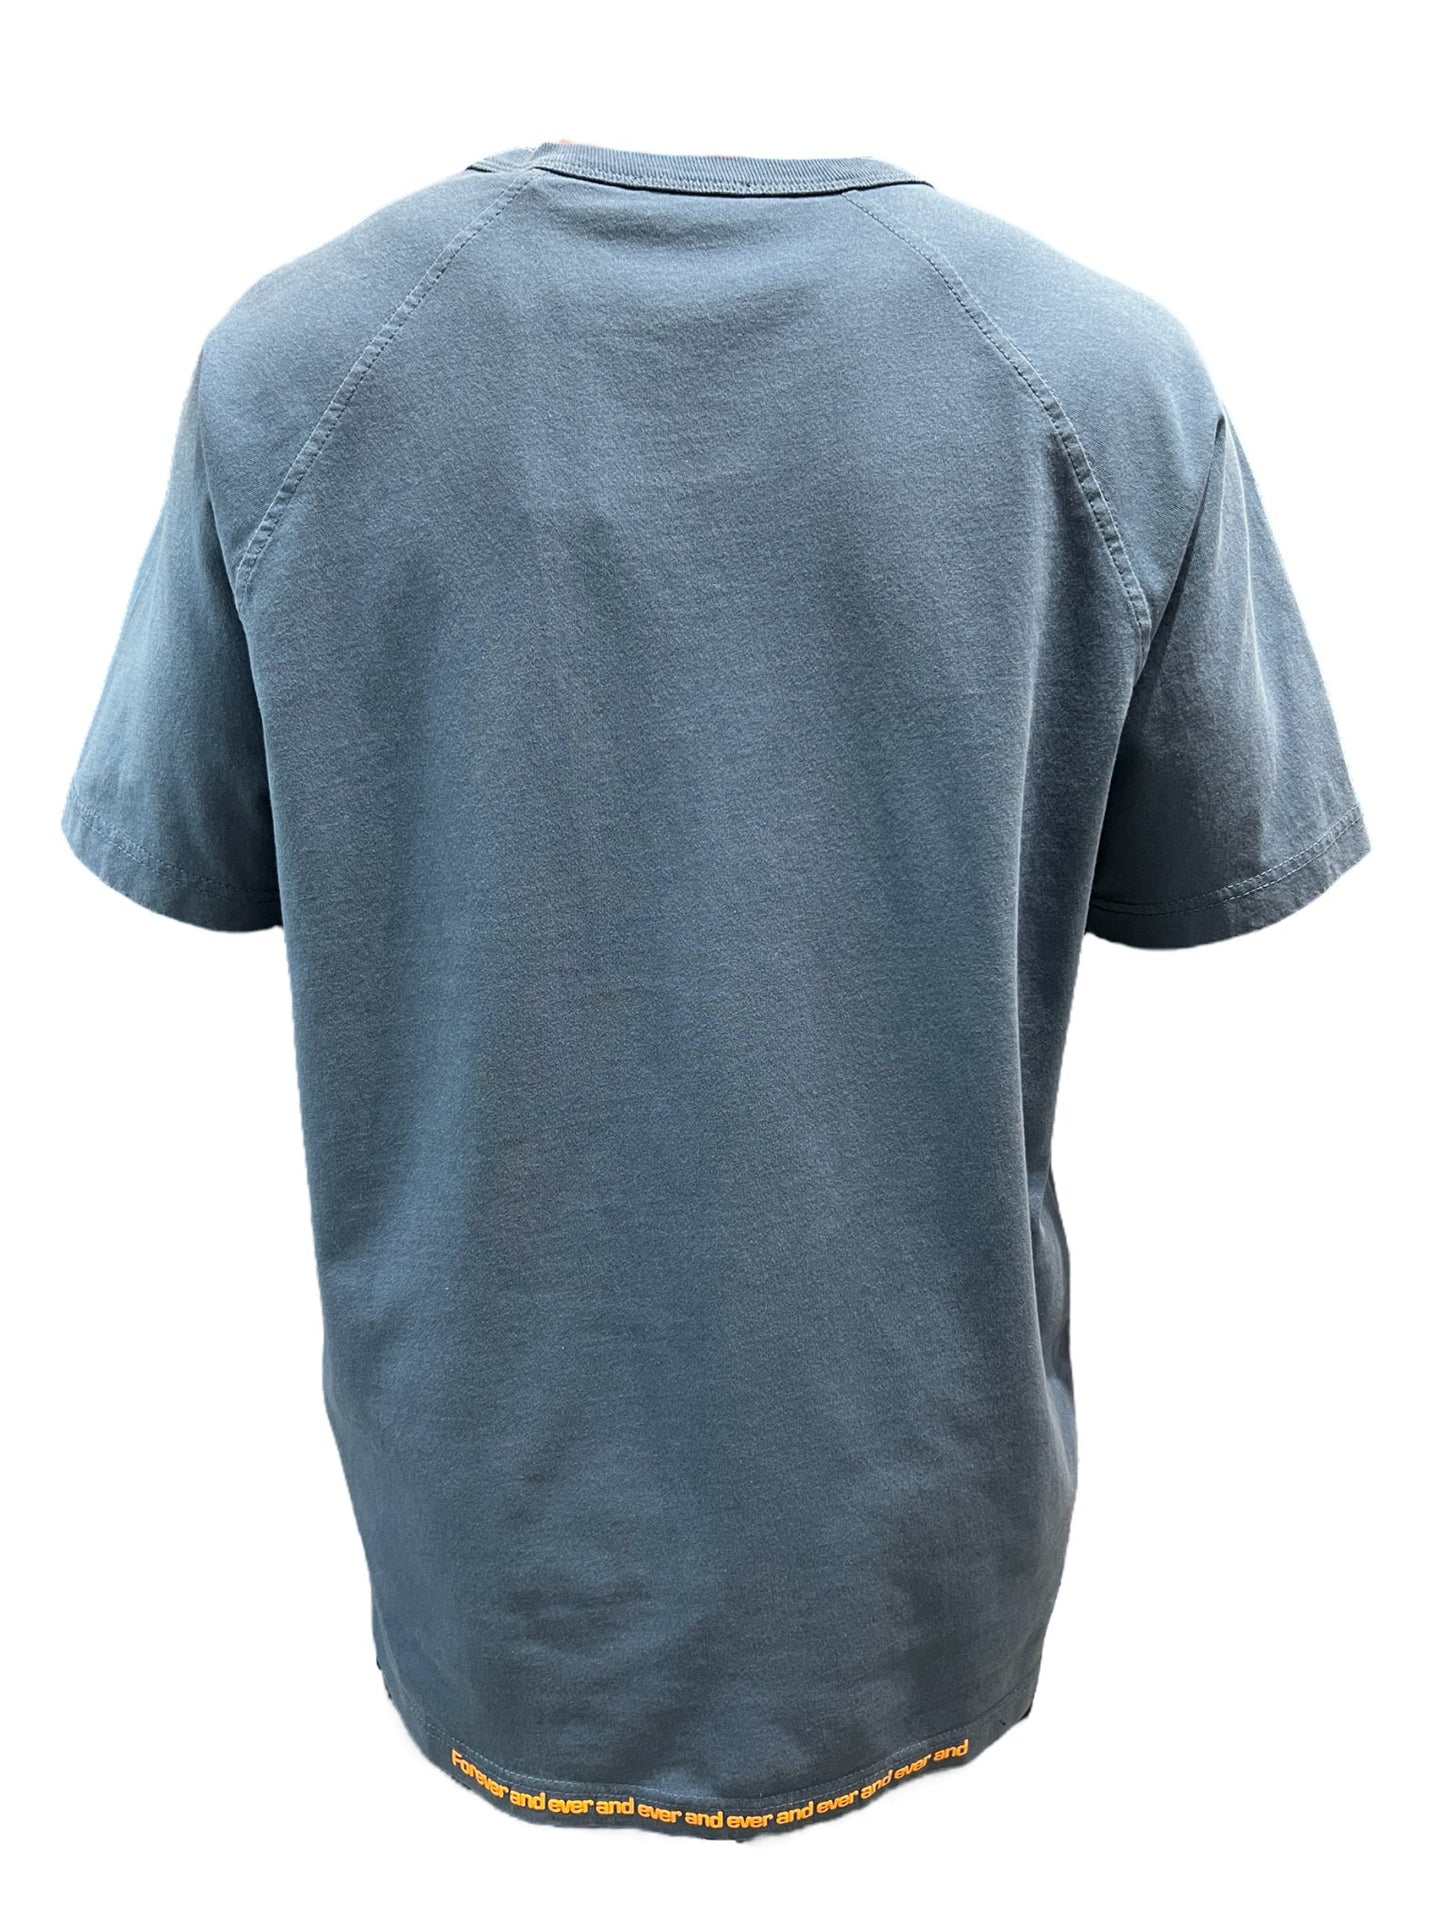 Plain teal DIESEL T-RUST t-shirt displayed from the back on a black background.